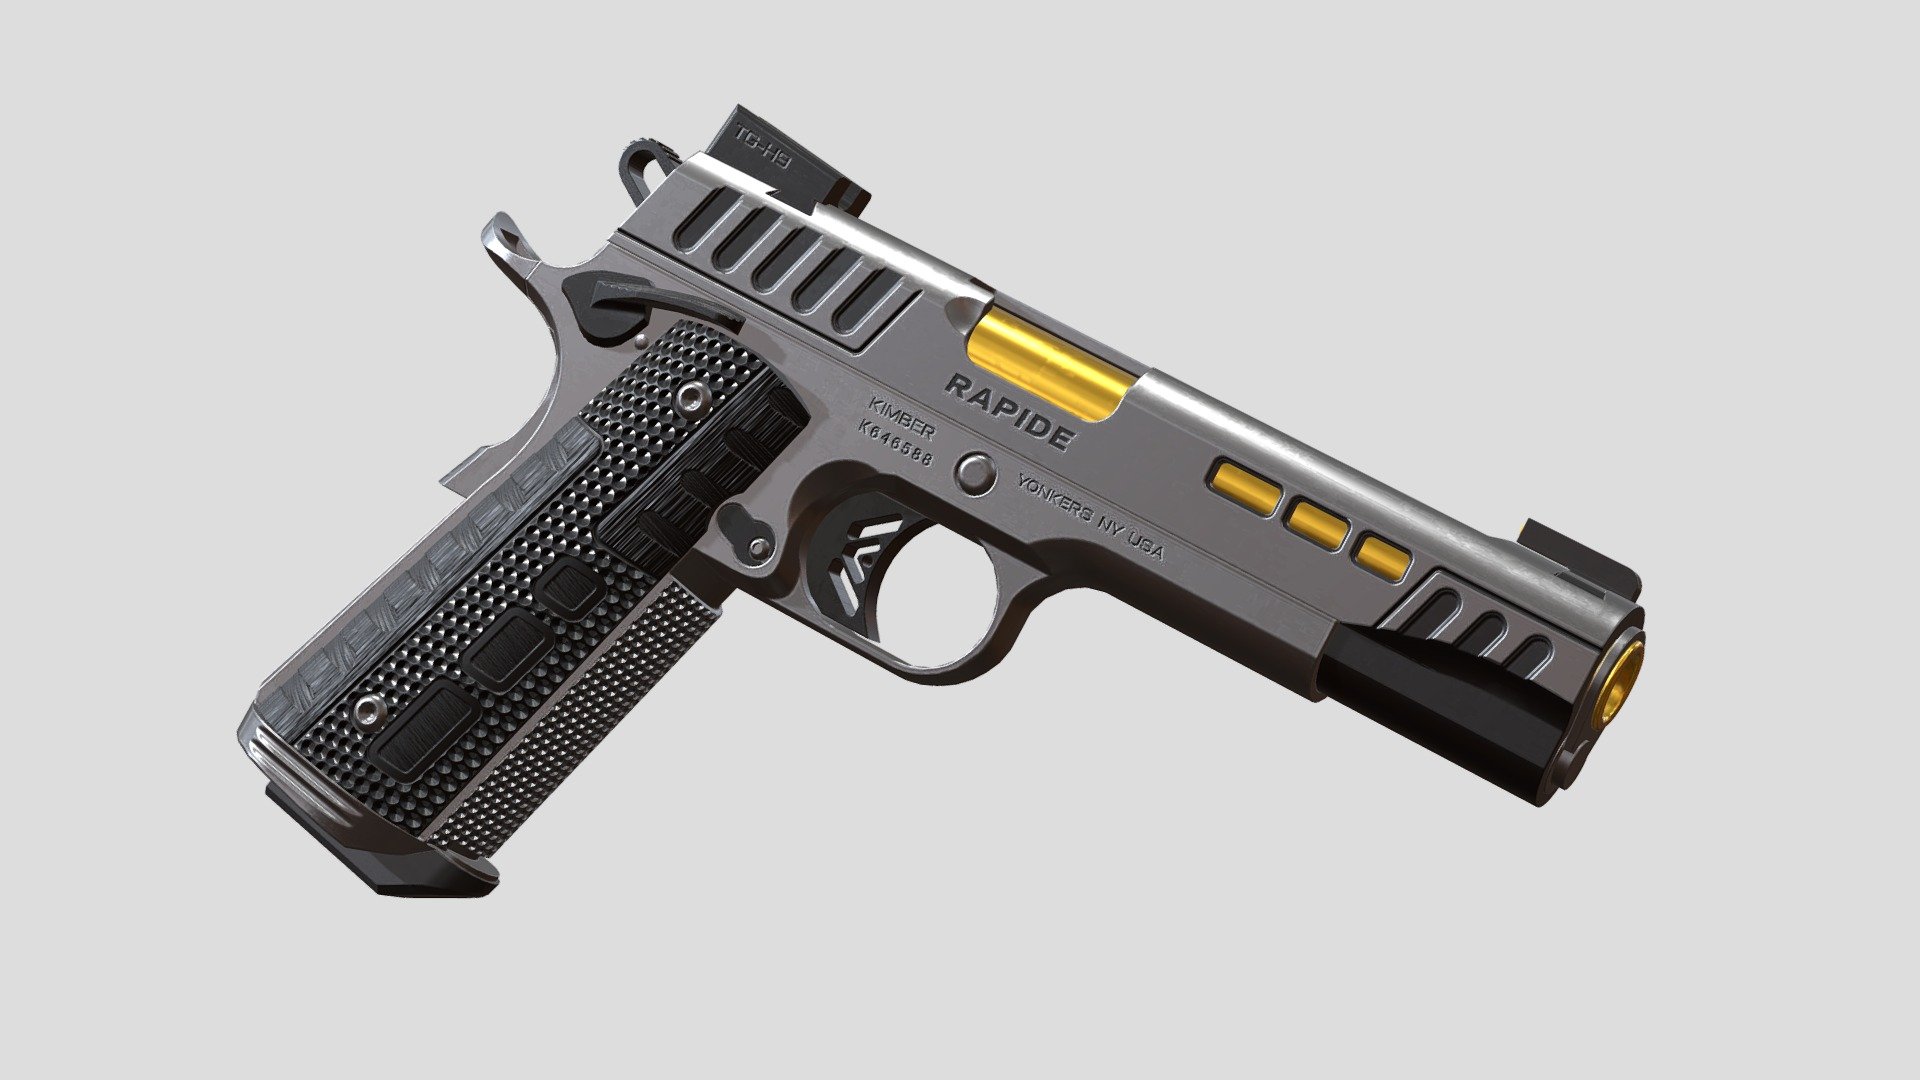 Kimber 1911 pistol with PBR textues 3d model